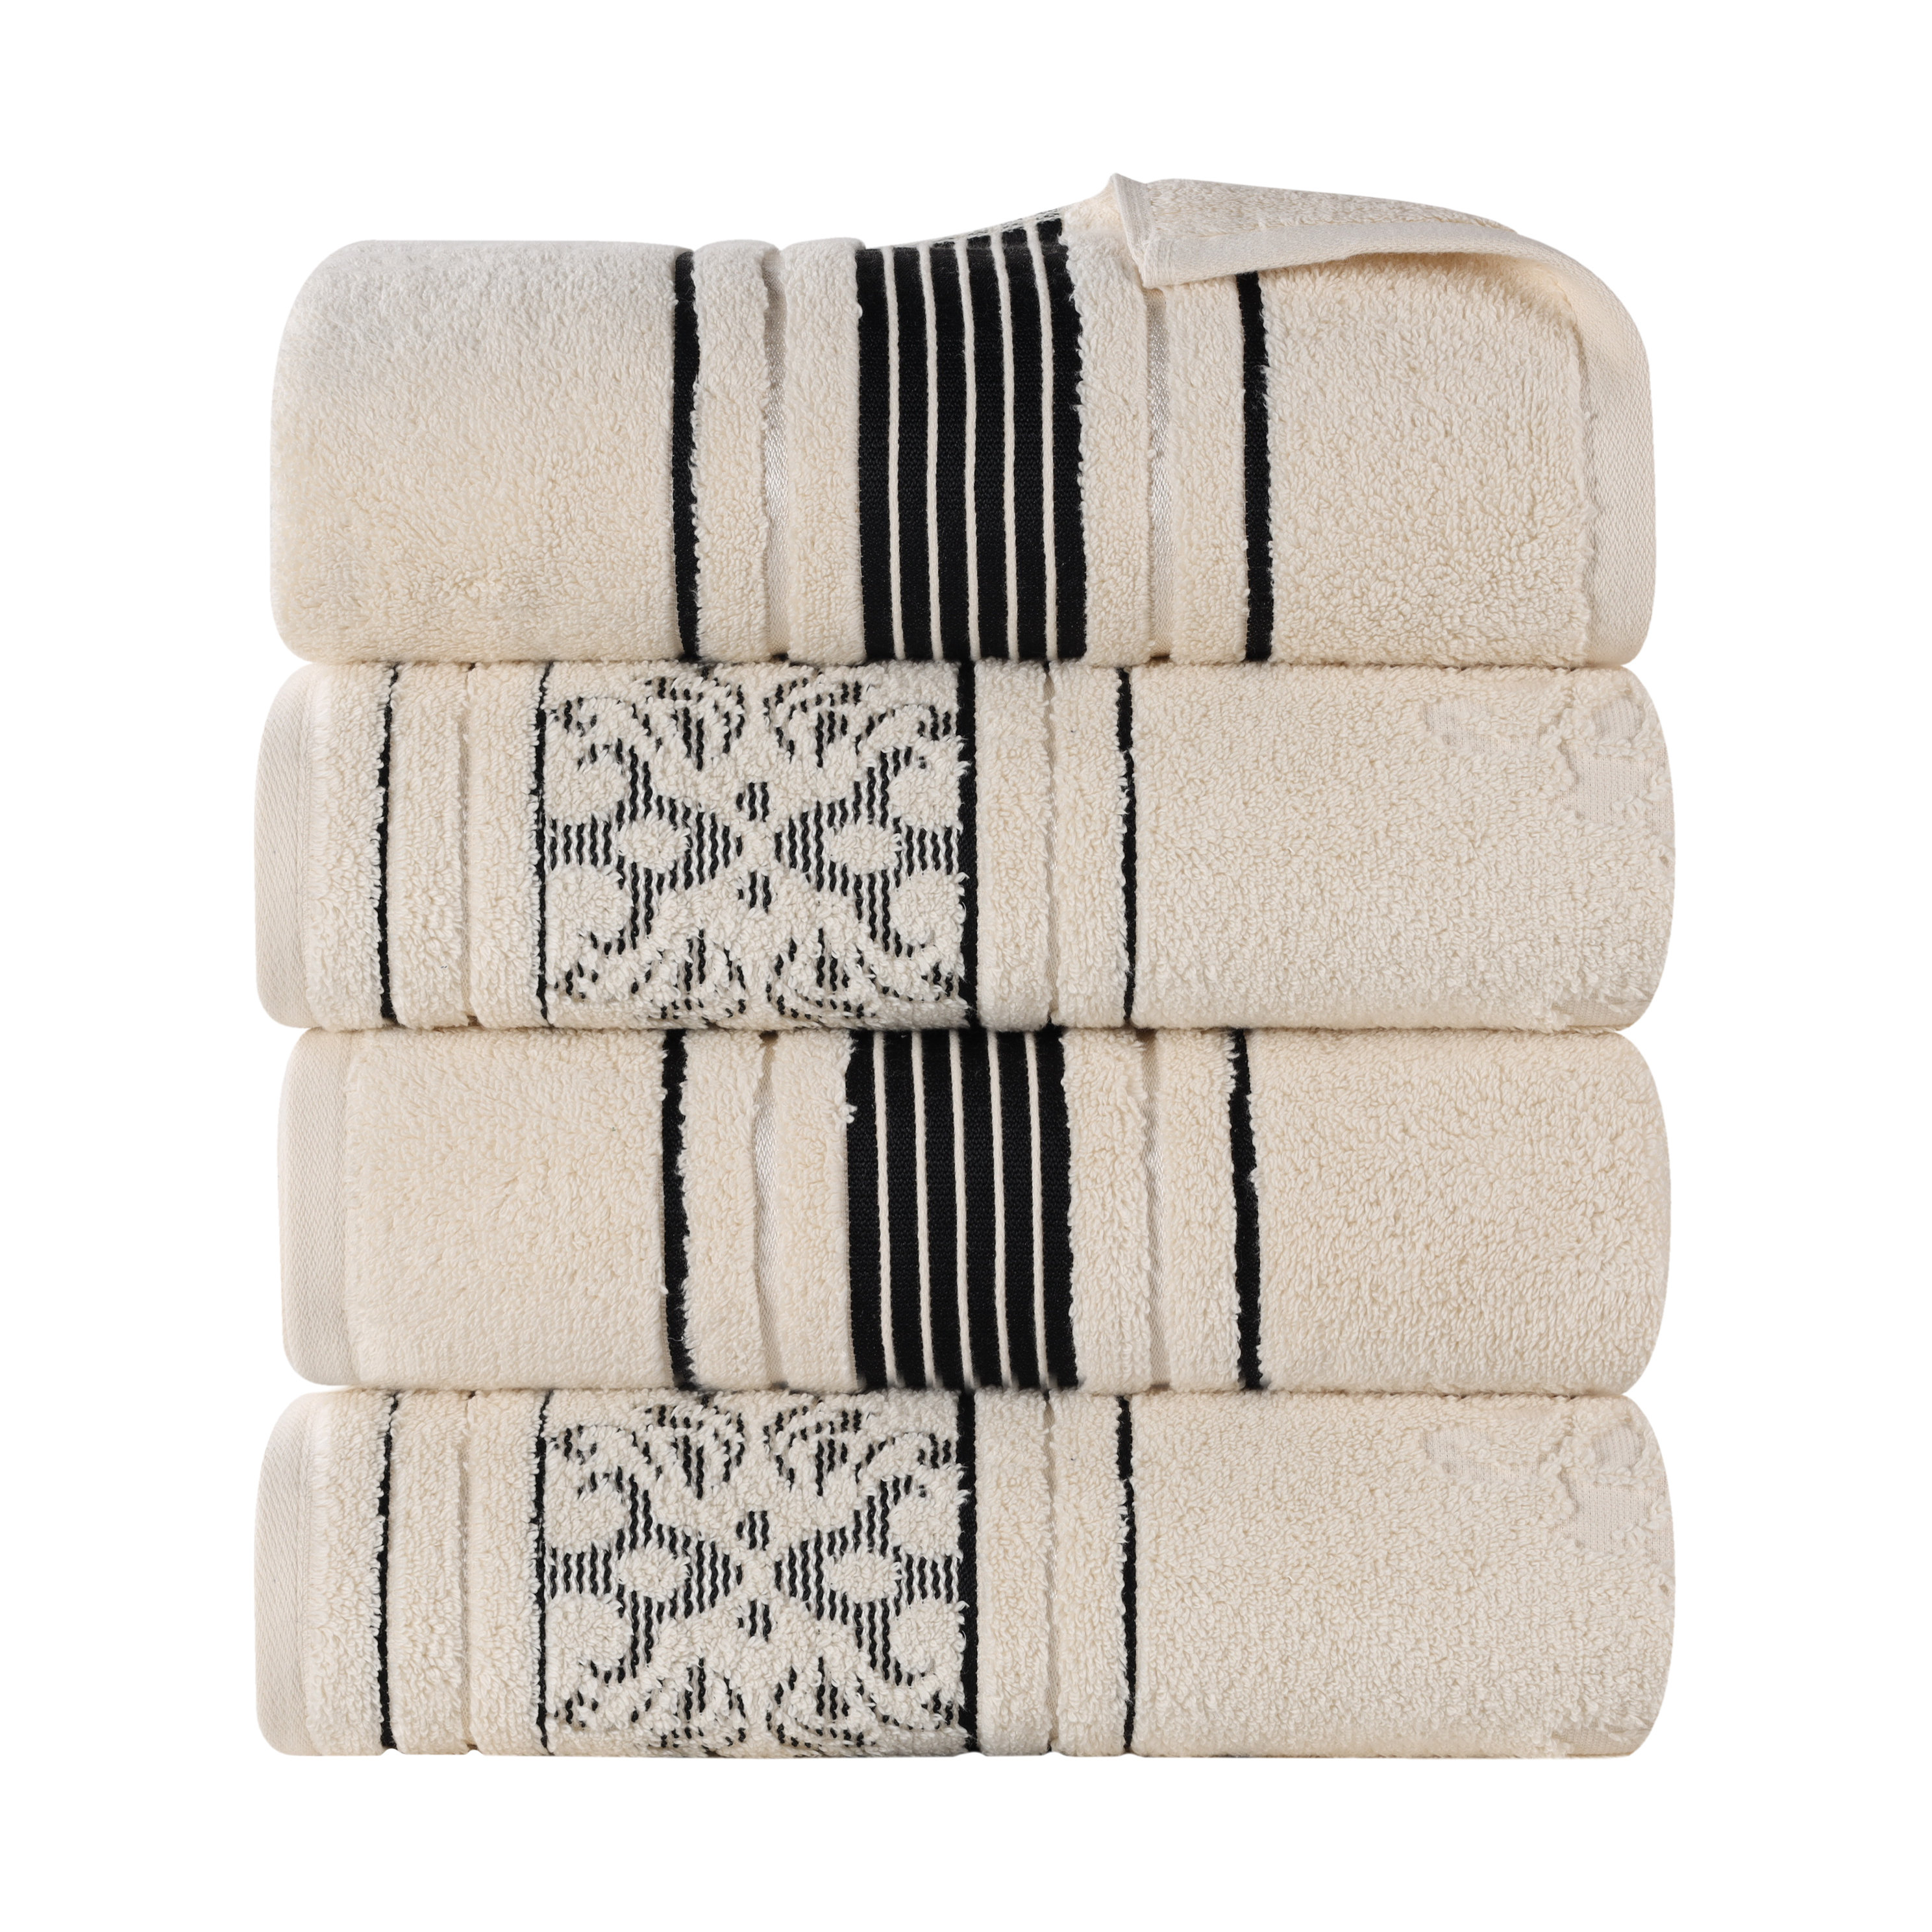 Sadie Zero Twist Cotton Solid and Jacquard Floral Absorbent 9 Piece Assorted Towel Set Charlton Home Color: Ivory